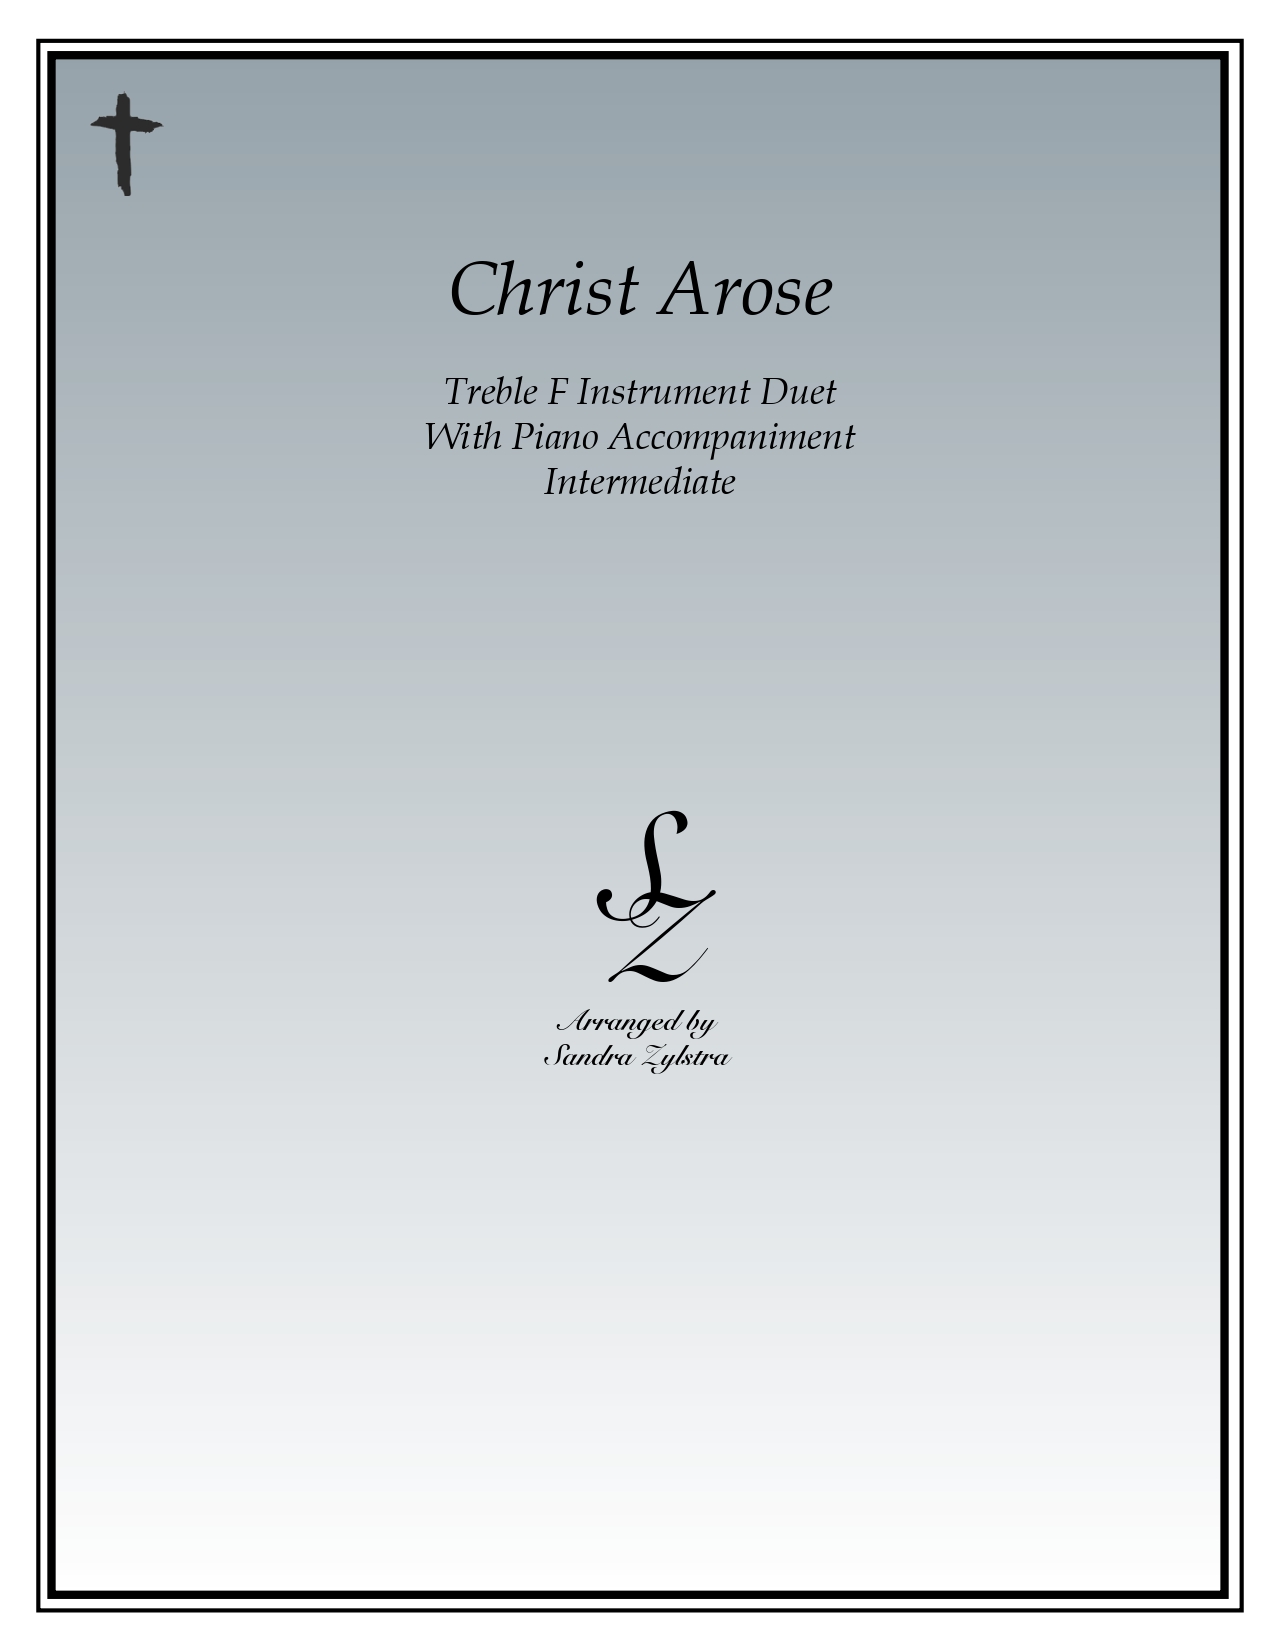 Christ Arose F instrument duet parts cover page 00011